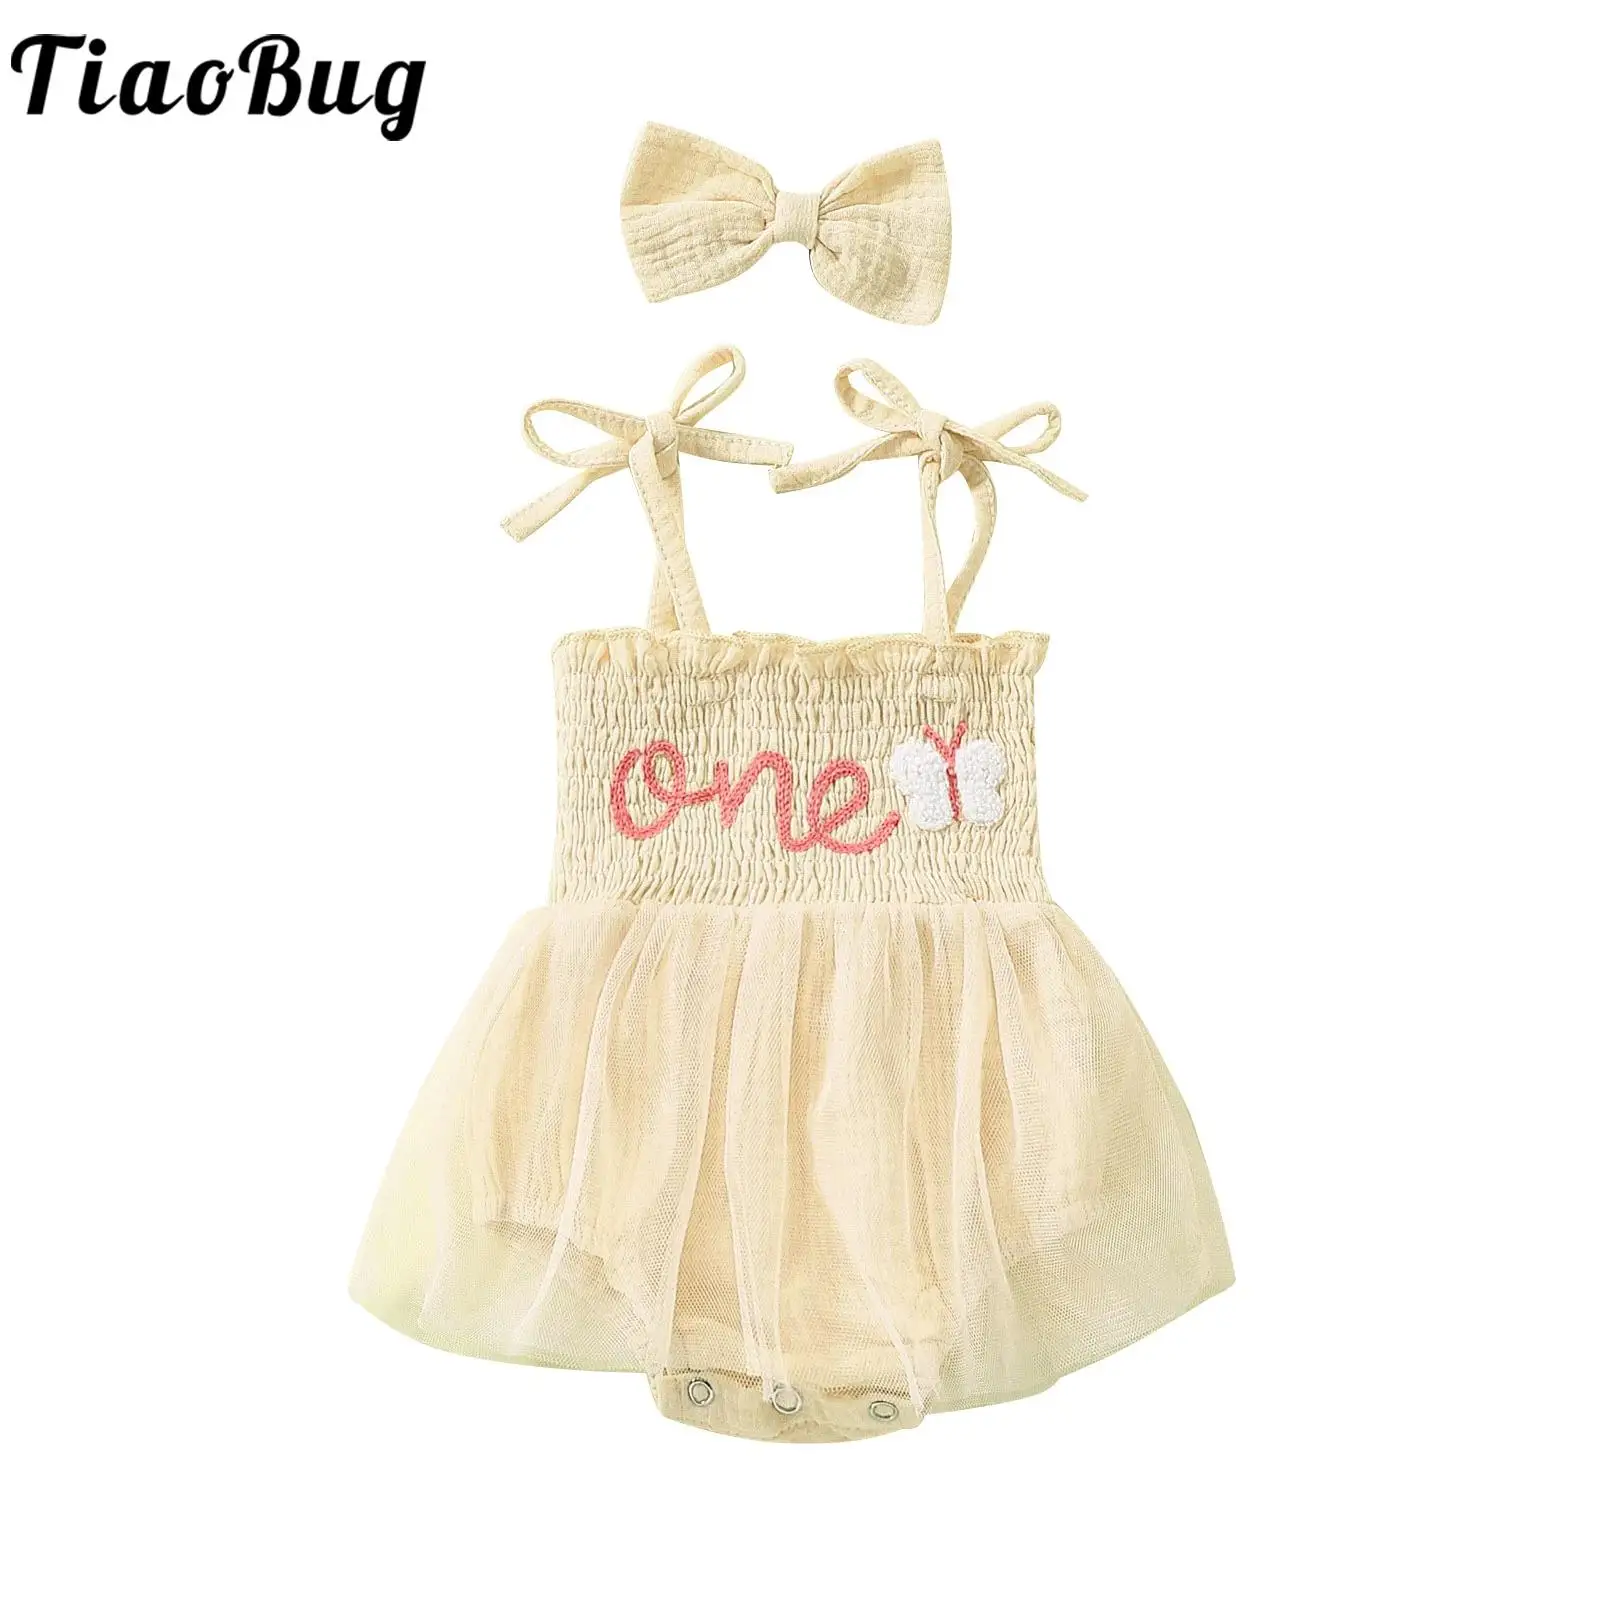 

Baby Girls 1st Birthday Outfits Sleeveless Smocked Tulle Dress Romper with Headband for One Year Old Party Photo Shoot Clothes